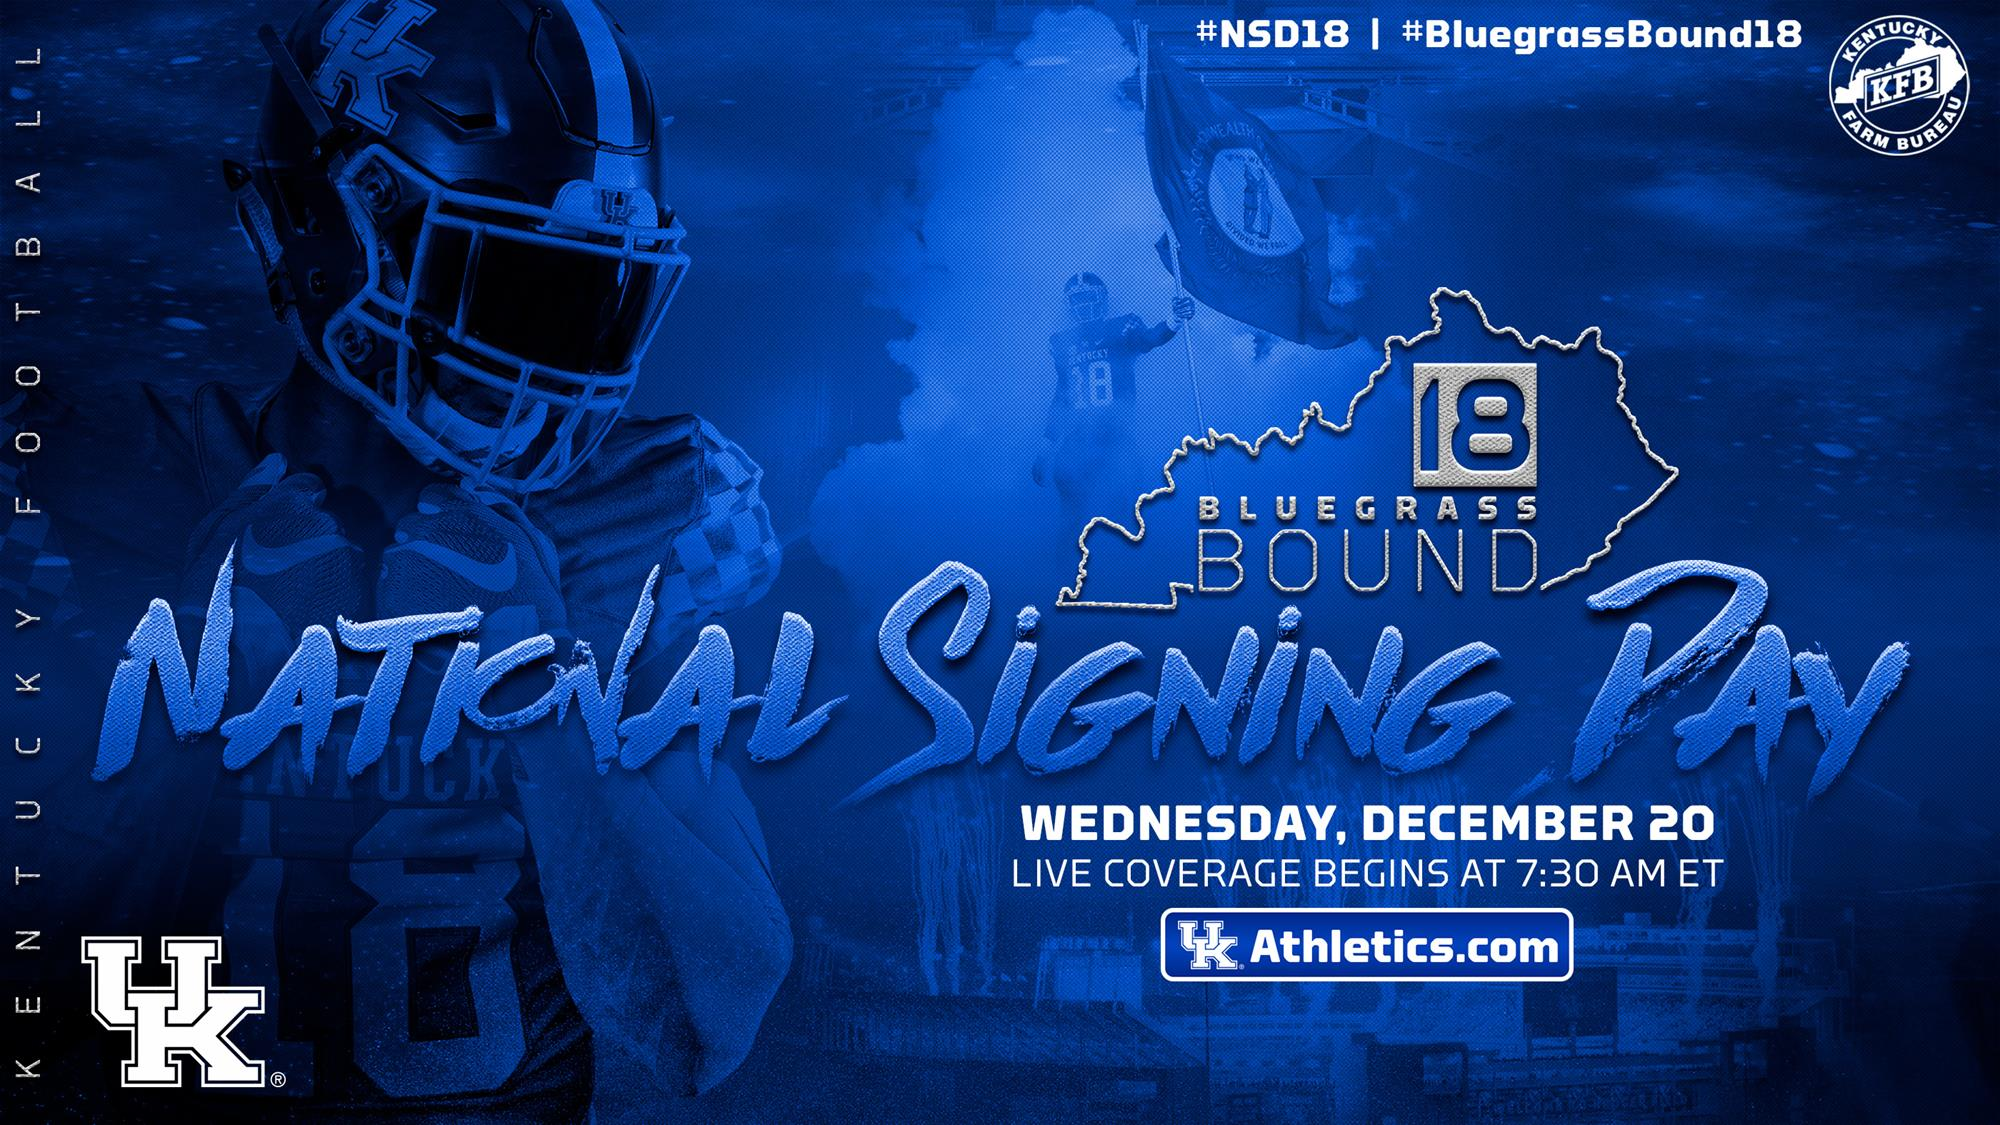 Live Signing Day Coverage on Wednesday